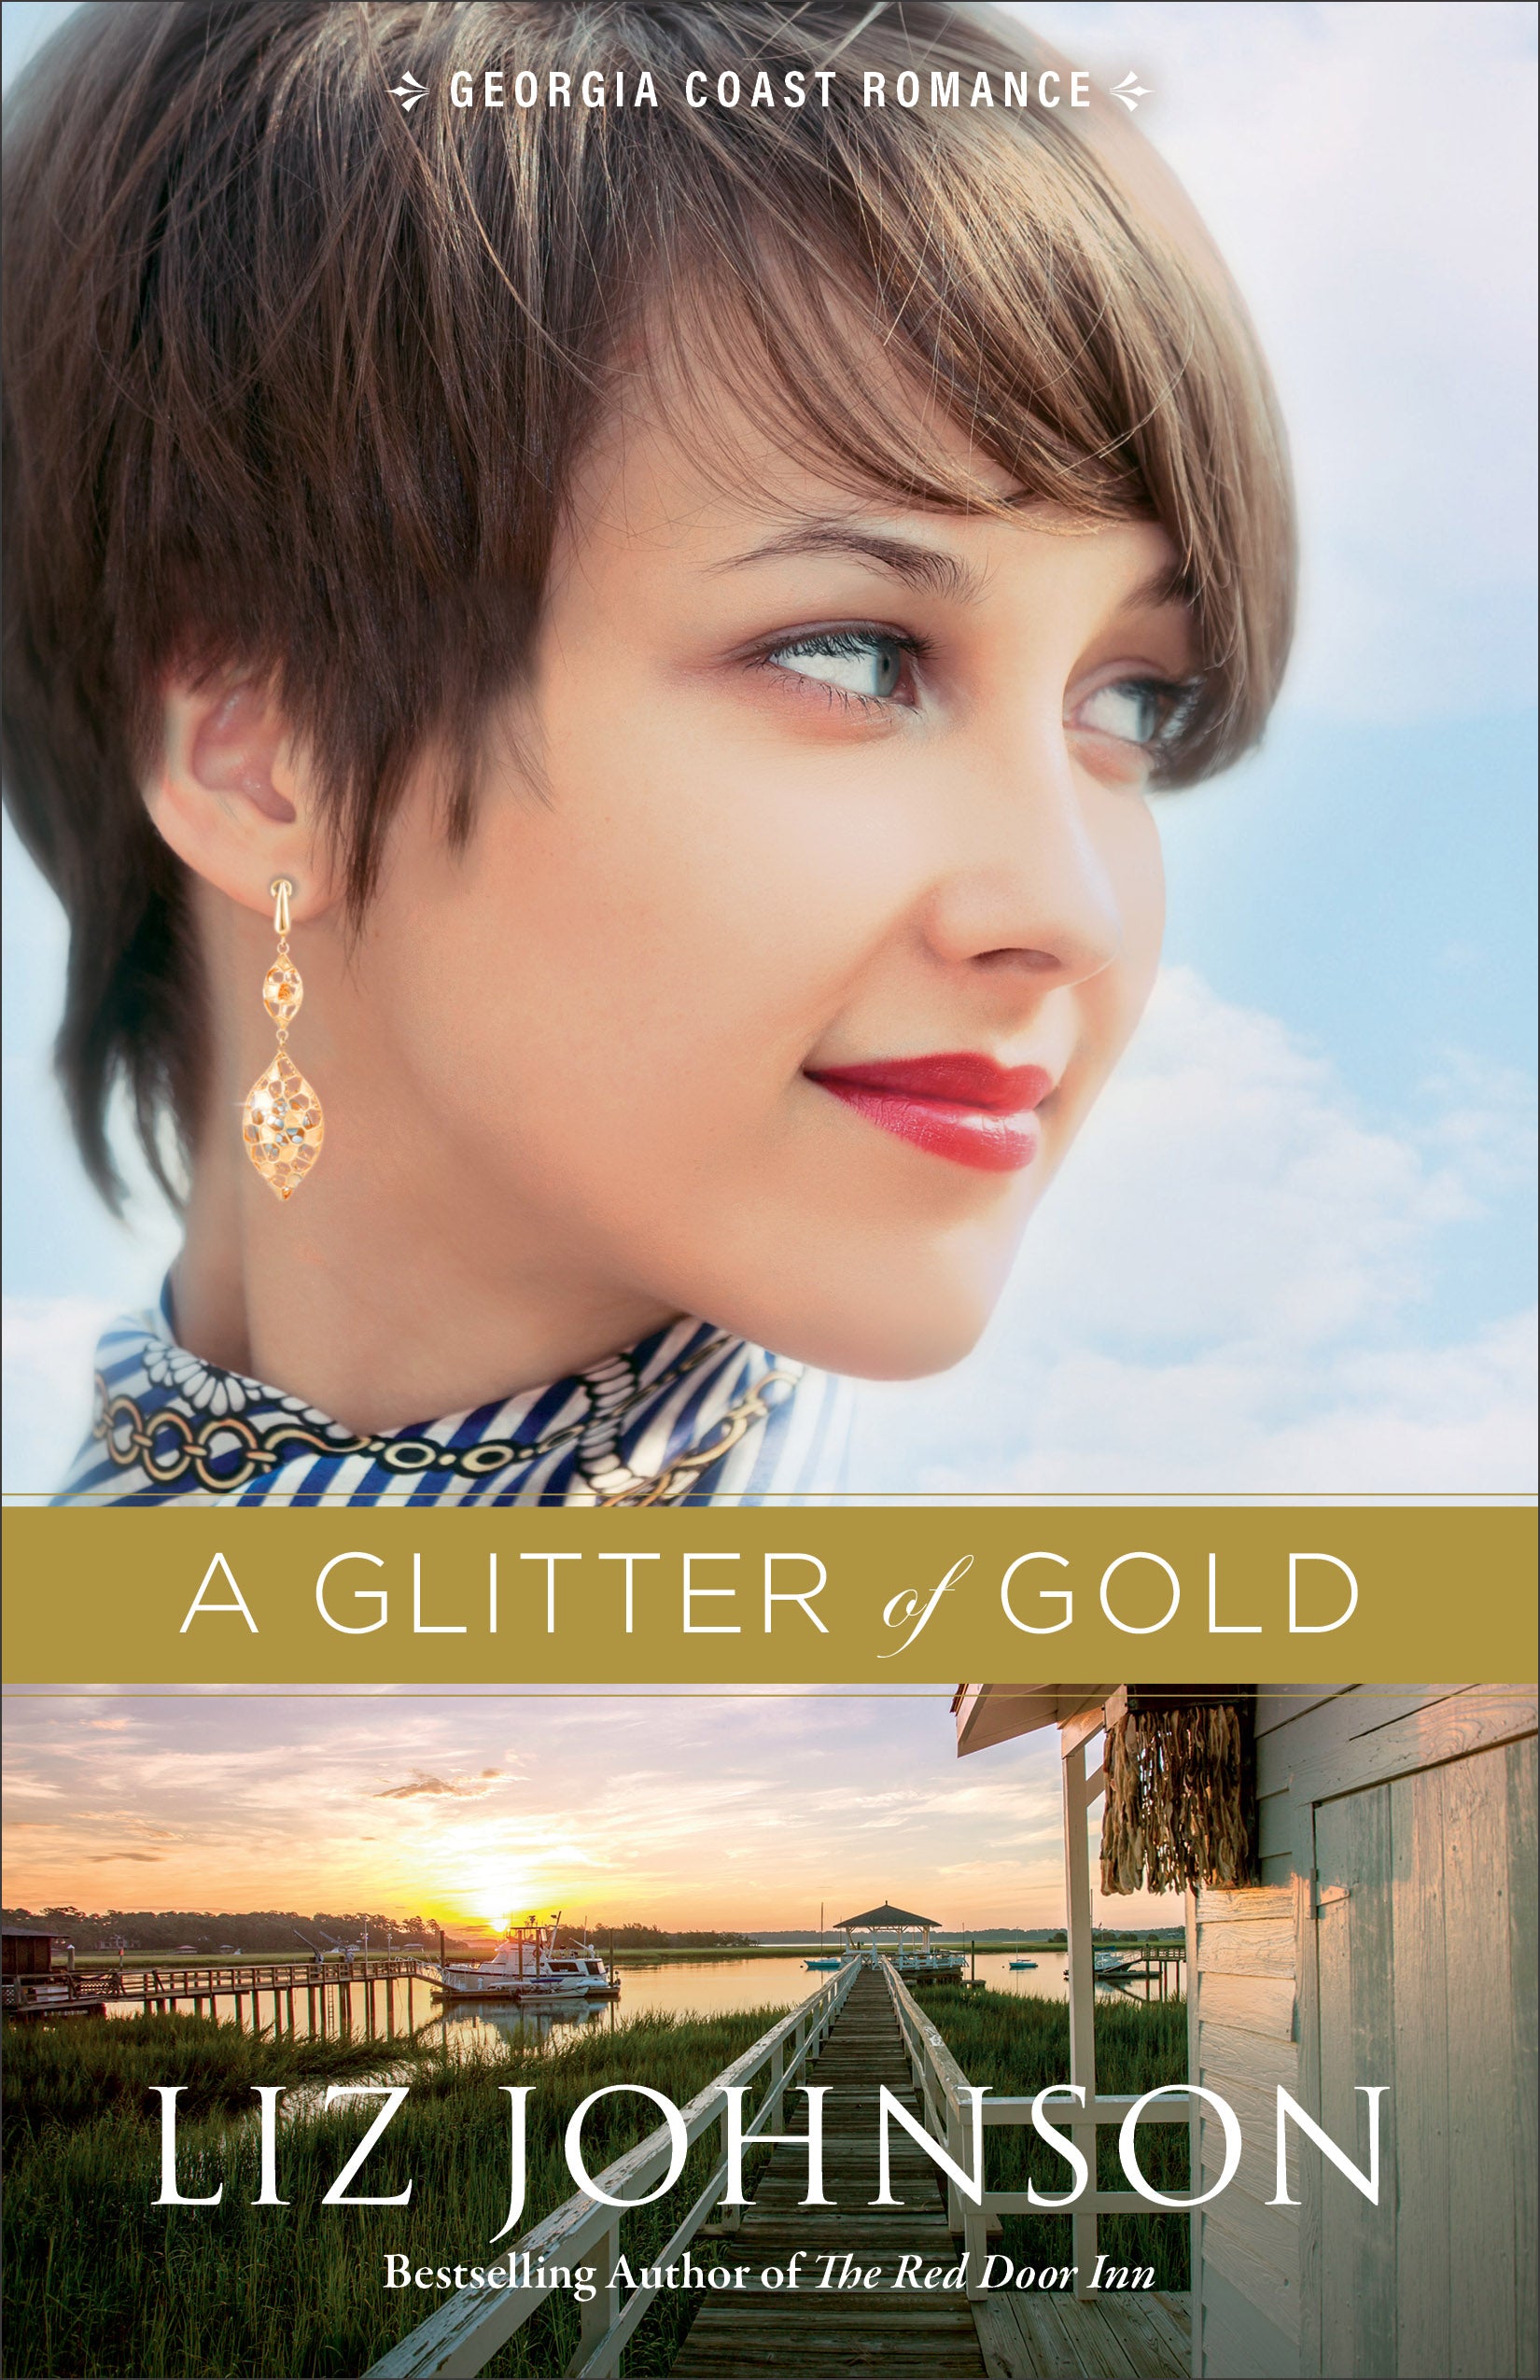 Image of A Glitter of Gold other